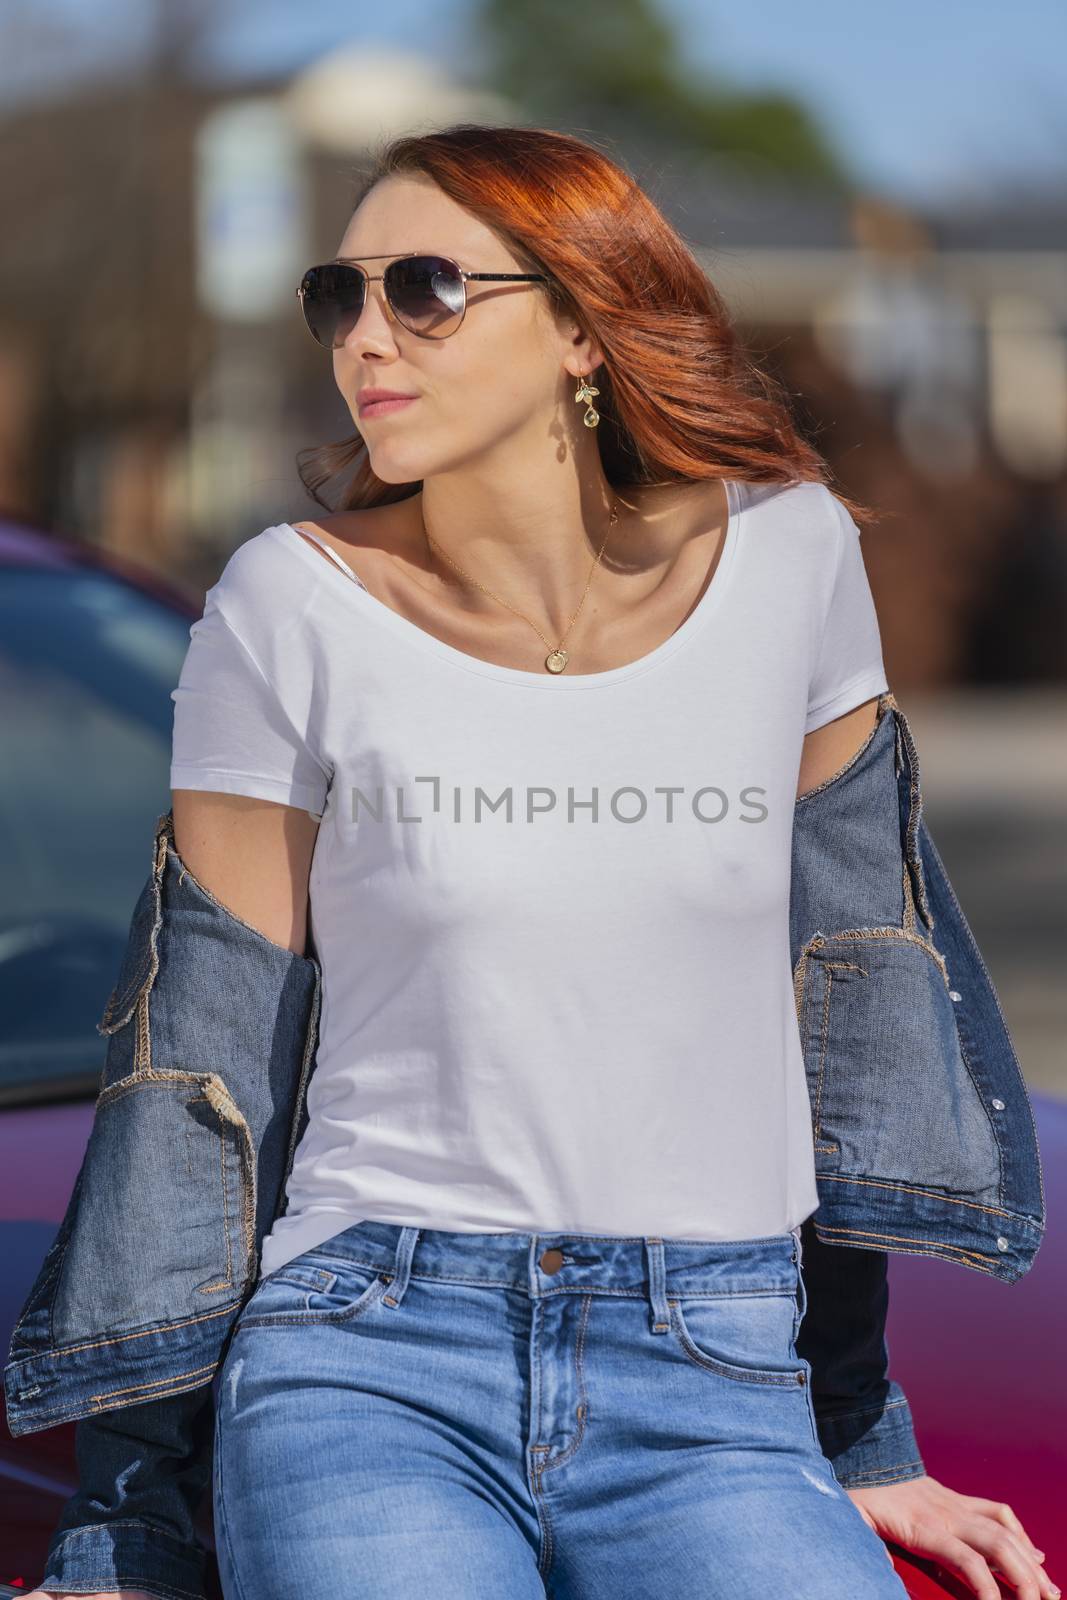 A Lovely Redhead Model Enjoys An Spring Day Outdoors by actionsports